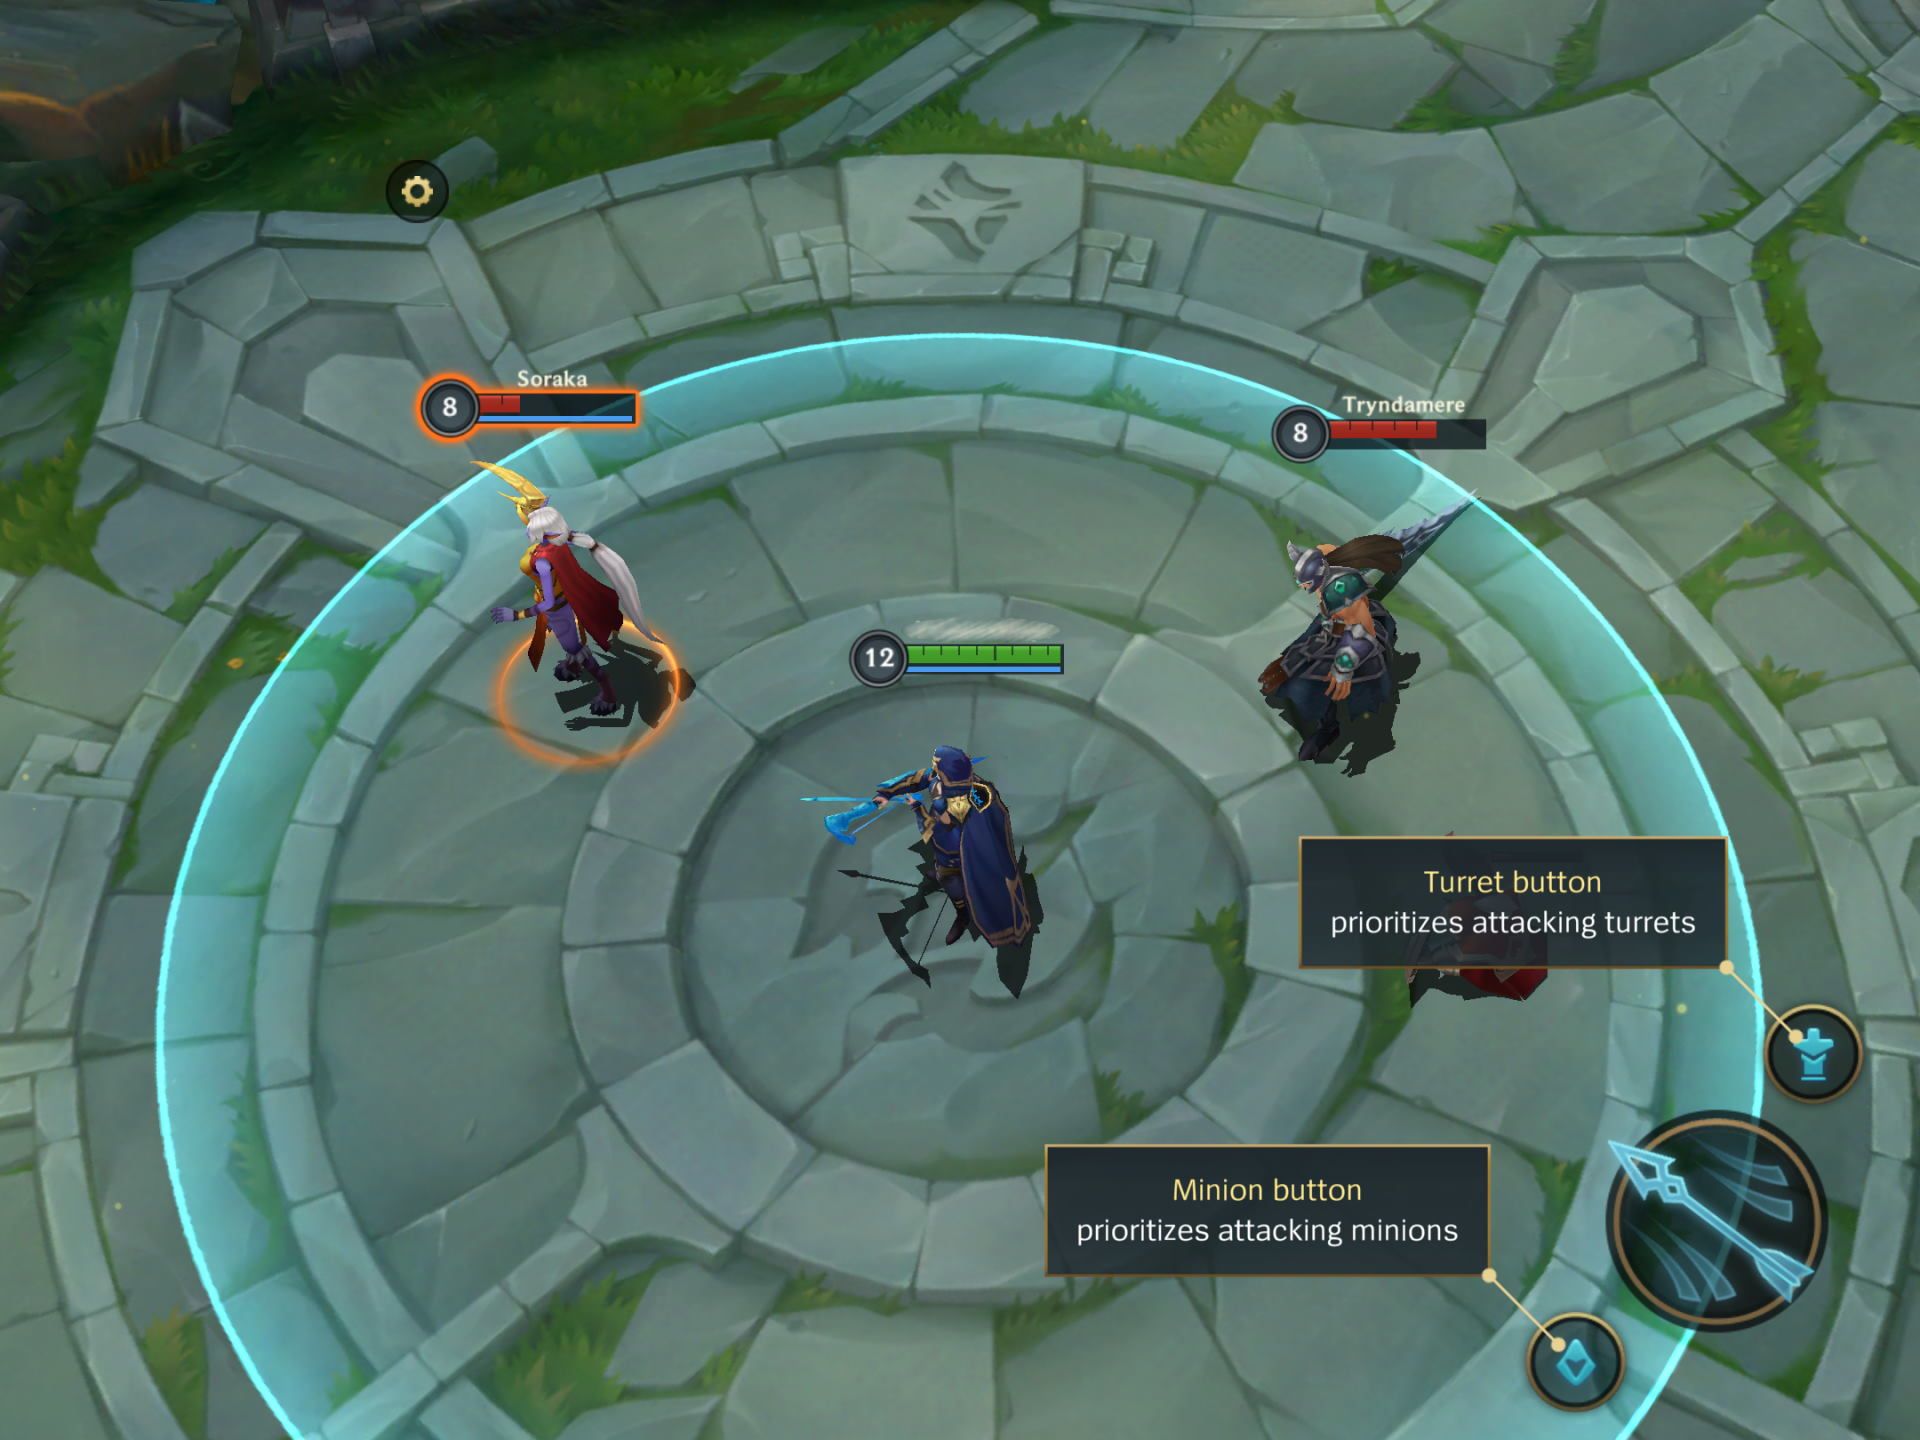 Minion and Turret Button in the tutorial mode in League of Legends Wild Rift